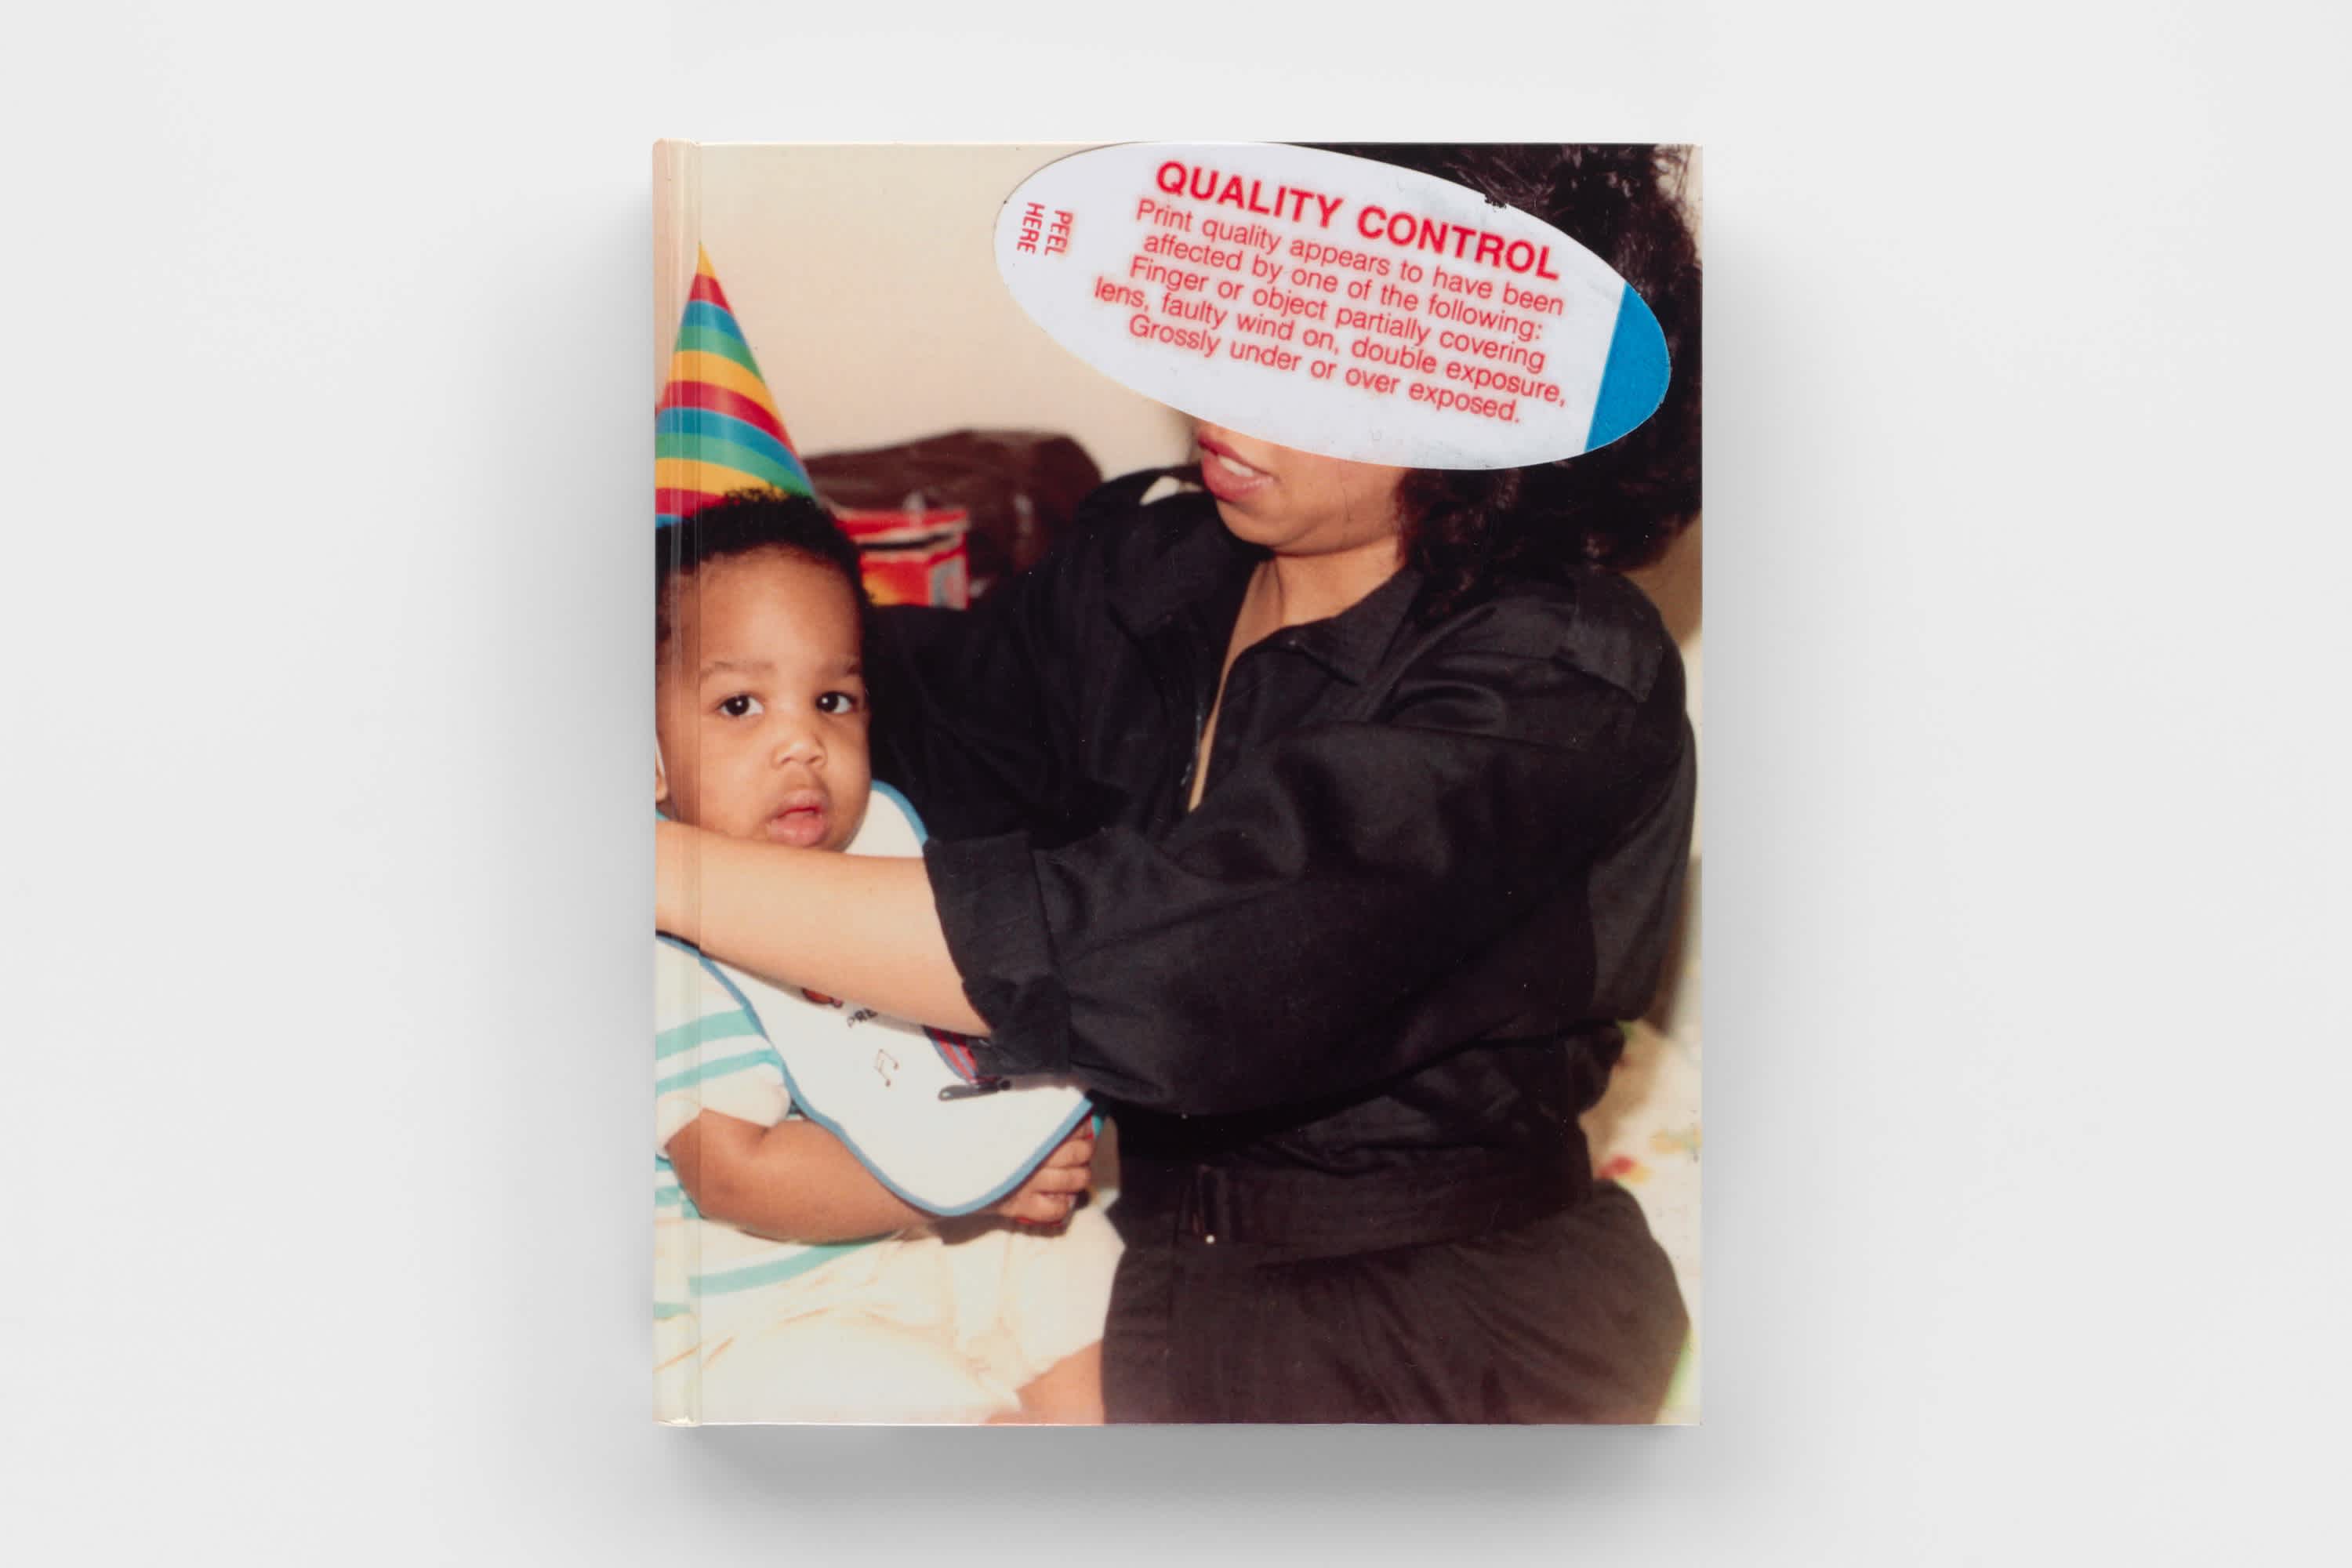 The front cover of a book floating on a gray background. The cover is an old home photo of a mother holding a baby. The baby wears a pointed birthday hat. The mother's face is obscured by a film processing quality check sticker which includes the title of the book, "Quality Control".